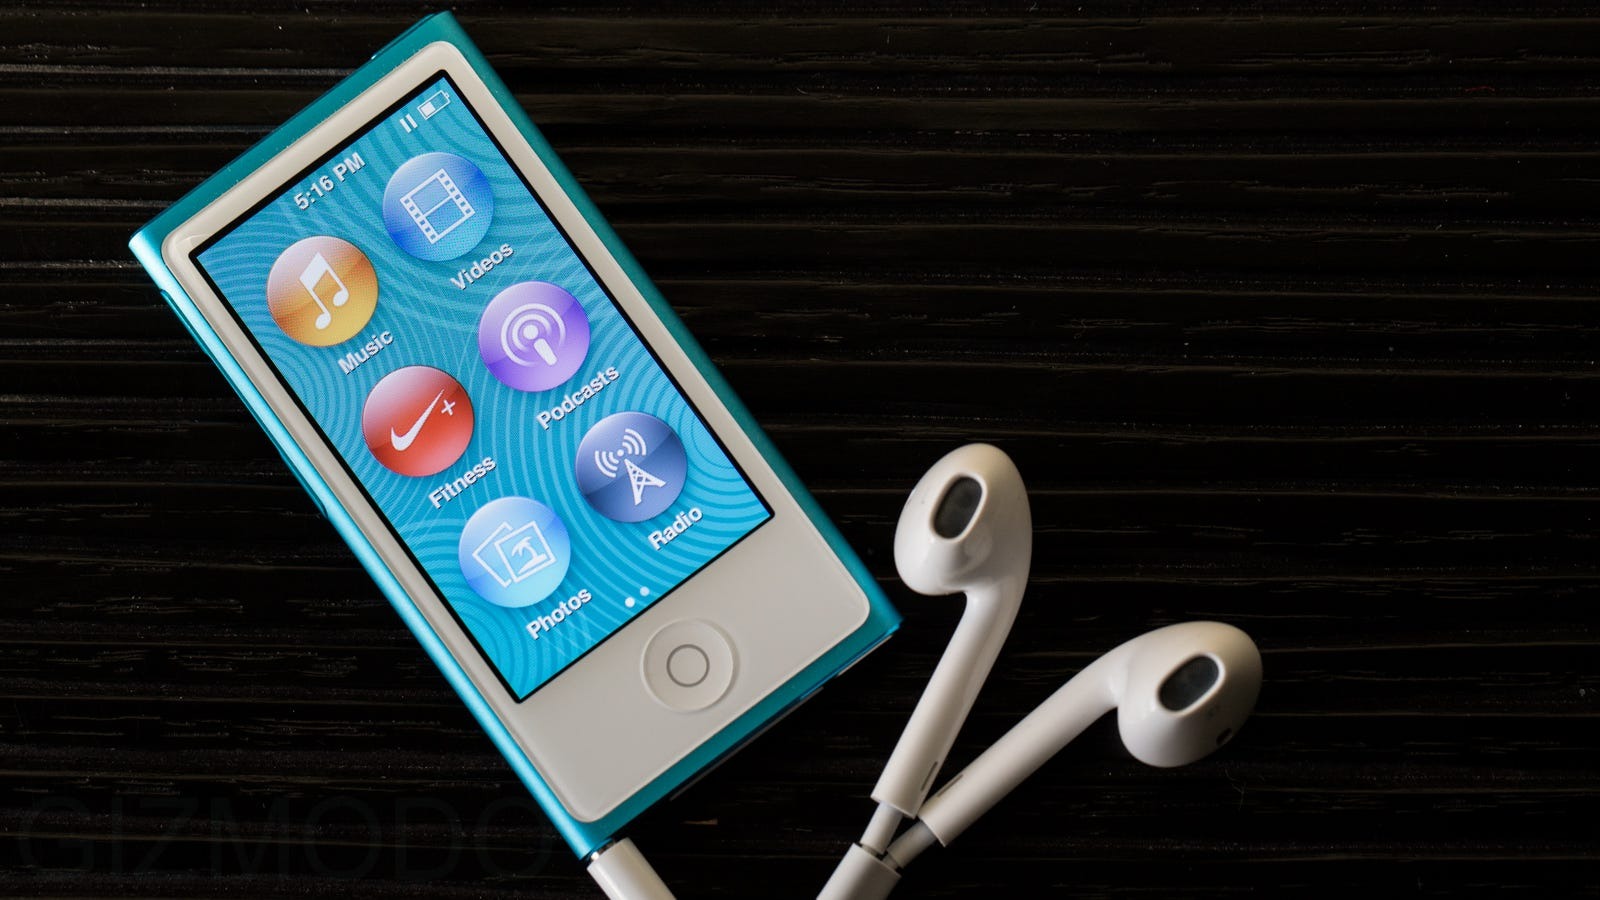 IPod Nano: Everything You Need To Know